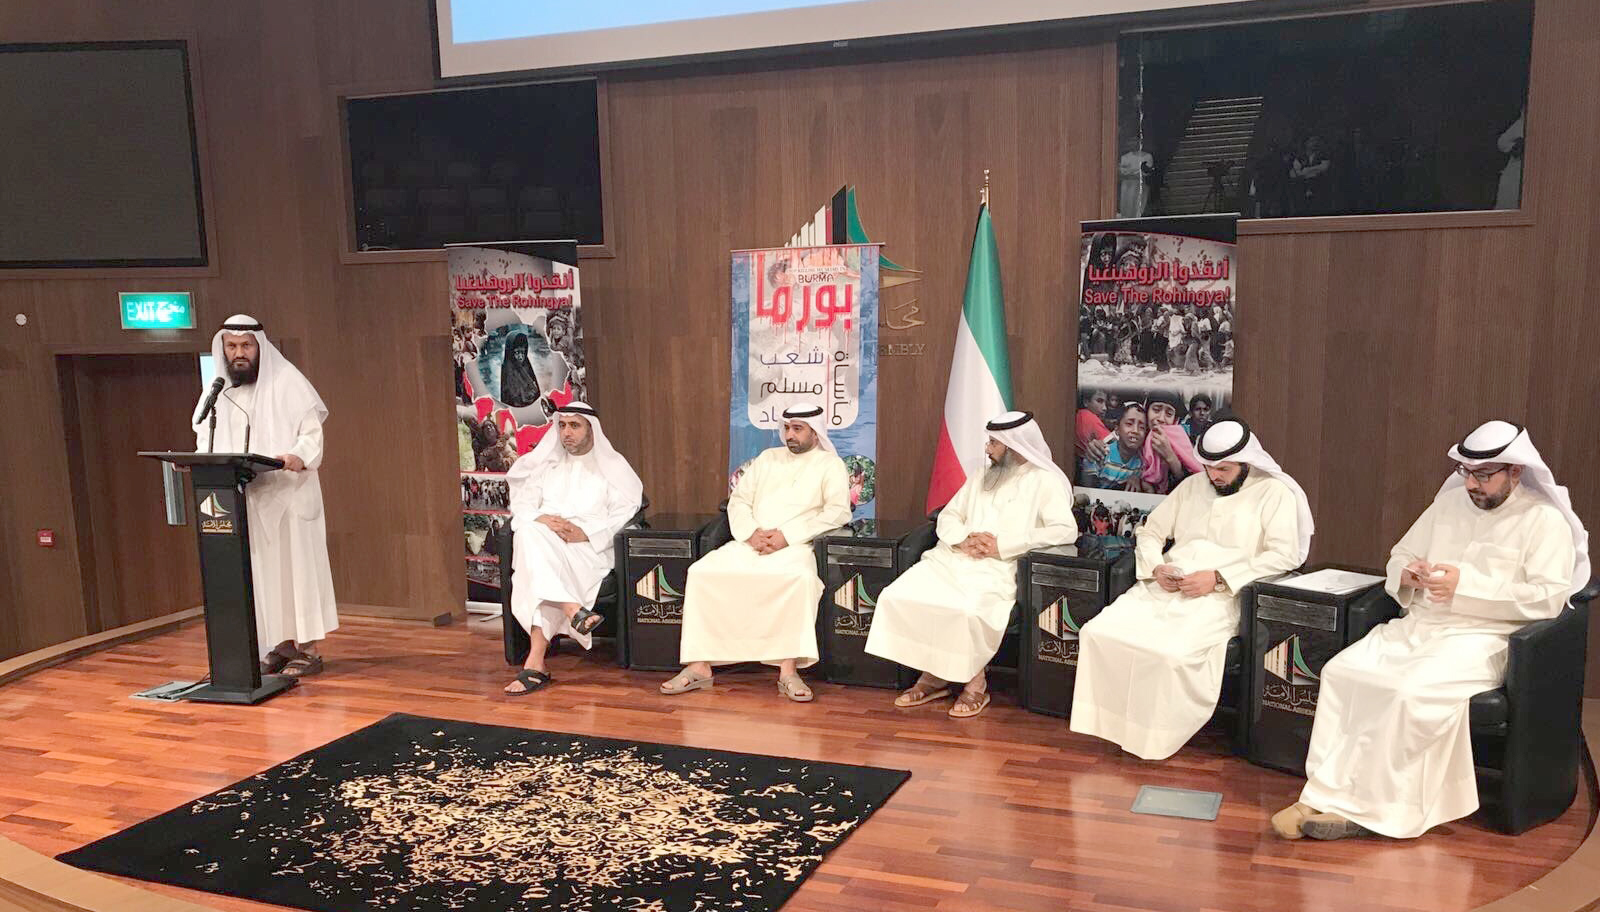 The Kuwaiti lawmakers during the press conference organized by the National Assembly